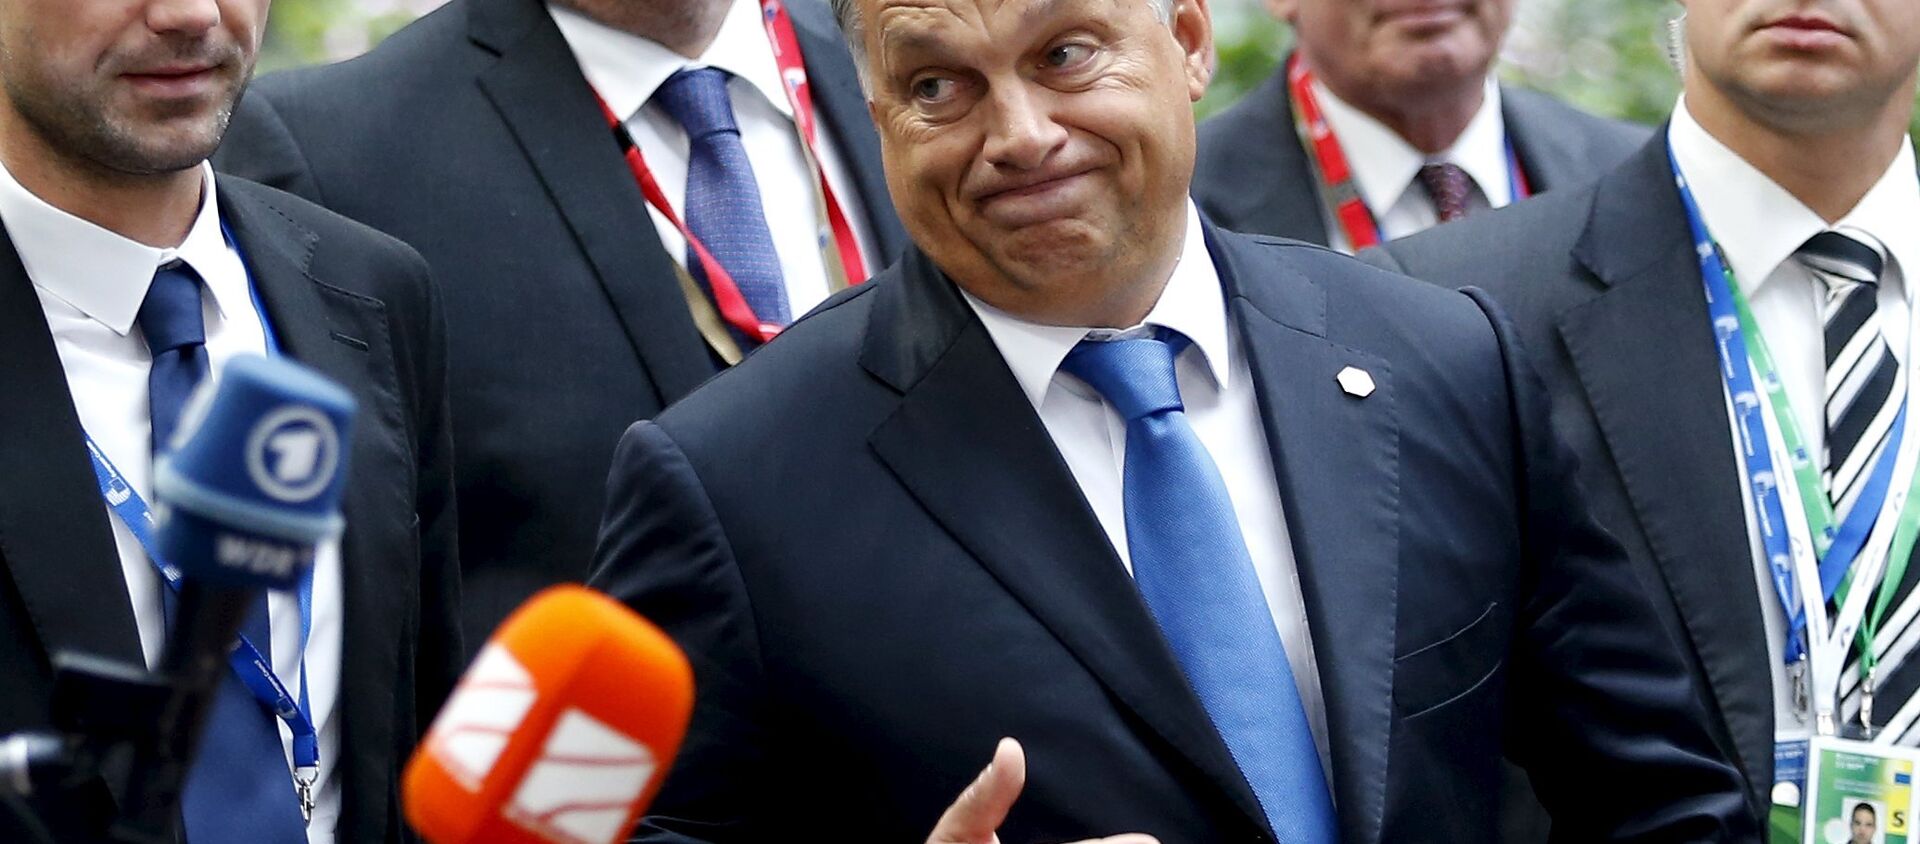 Hungary's Prime Minister Viktor Orban reacts as he arrives at a European Union leaders extraordinary summit on the migrant crisis, in Brussels, Belgium September 23, 2015. - Sputnik Moldova-România, 1920, 02.07.2021